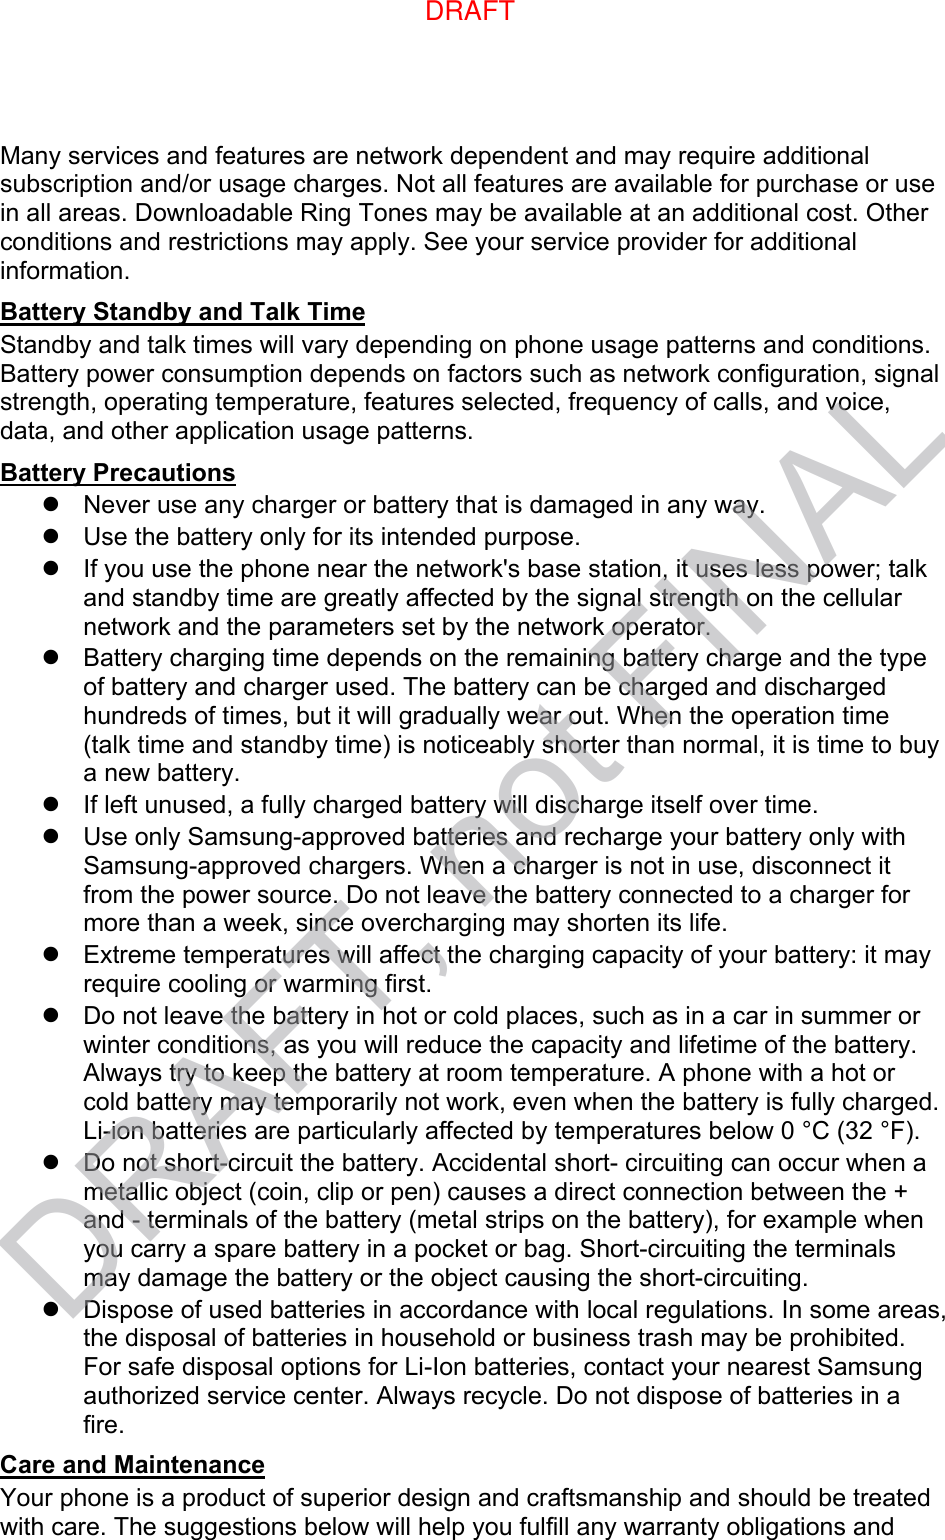 Many services and features are network dependent and may require additional subscription and/or usage charges. Not all features are available for purchase or use in all areas. Downloadable Ring Tones may be available at an additional cost. Other conditions and restrictions may apply. See your service provider for additional information. Battery Standby and Talk Time Standby and talk times will vary depending on phone usage patterns and conditions. Battery power consumption depends on factors such as network configuration, signal strength, operating temperature, features selected, frequency of calls, and voice, data, and other application usage patterns.   Battery Precautions Never use any charger or battery that is damaged in any way.Use the battery only for its intended purpose.If you use the phone near the network&apos;s base station, it uses less power; talkand standby time are greatly affected by the signal strength on the cellularnetwork and the parameters set by the network operator.Battery charging time depends on the remaining battery charge and the typeof battery and charger used. The battery can be charged and dischargedhundreds of times, but it will gradually wear out. When the operation time(talk time and standby time) is noticeably shorter than normal, it is time to buya new battery.If left unused, a fully charged battery will discharge itself over time.Use only Samsung-approved batteries and recharge your battery only withSamsung-approved chargers. When a charger is not in use, disconnect itfrom the power source. Do not leave the battery connected to a charger formore than a week, since overcharging may shorten its life.Extreme temperatures will affect the charging capacity of your battery: it mayrequire cooling or warming first.Do not leave the battery in hot or cold places, such as in a car in summer orwinter conditions, as you will reduce the capacity and lifetime of the battery.Always try to keep the battery at room temperature. A phone with a hot orcold battery may temporarily not work, even when the battery is fully charged.Li-ion batteries are particularly affected by temperatures below 0 °C (32 °F).Do not short-circuit the battery. Accidental short- circuiting can occur when ametallic object (coin, clip or pen) causes a direct connection between the +and - terminals of the battery (metal strips on the battery), for example whenyou carry a spare battery in a pocket or bag. Short-circuiting the terminalsmay damage the battery or the object causing the short-circuiting.Dispose of used batteries in accordance with local regulations. In some areas,the disposal of batteries in household or business trash may be prohibited.For safe disposal options for Li-Ion batteries, contact your nearest Samsungauthorized service center. Always recycle. Do not dispose of batteries in afire.Care and Maintenance Your phone is a product of superior design and craftsmanship and should be treated with care. The suggestions below will help you fulfill any warranty obligations and DRAFT, not FINALDRAFT